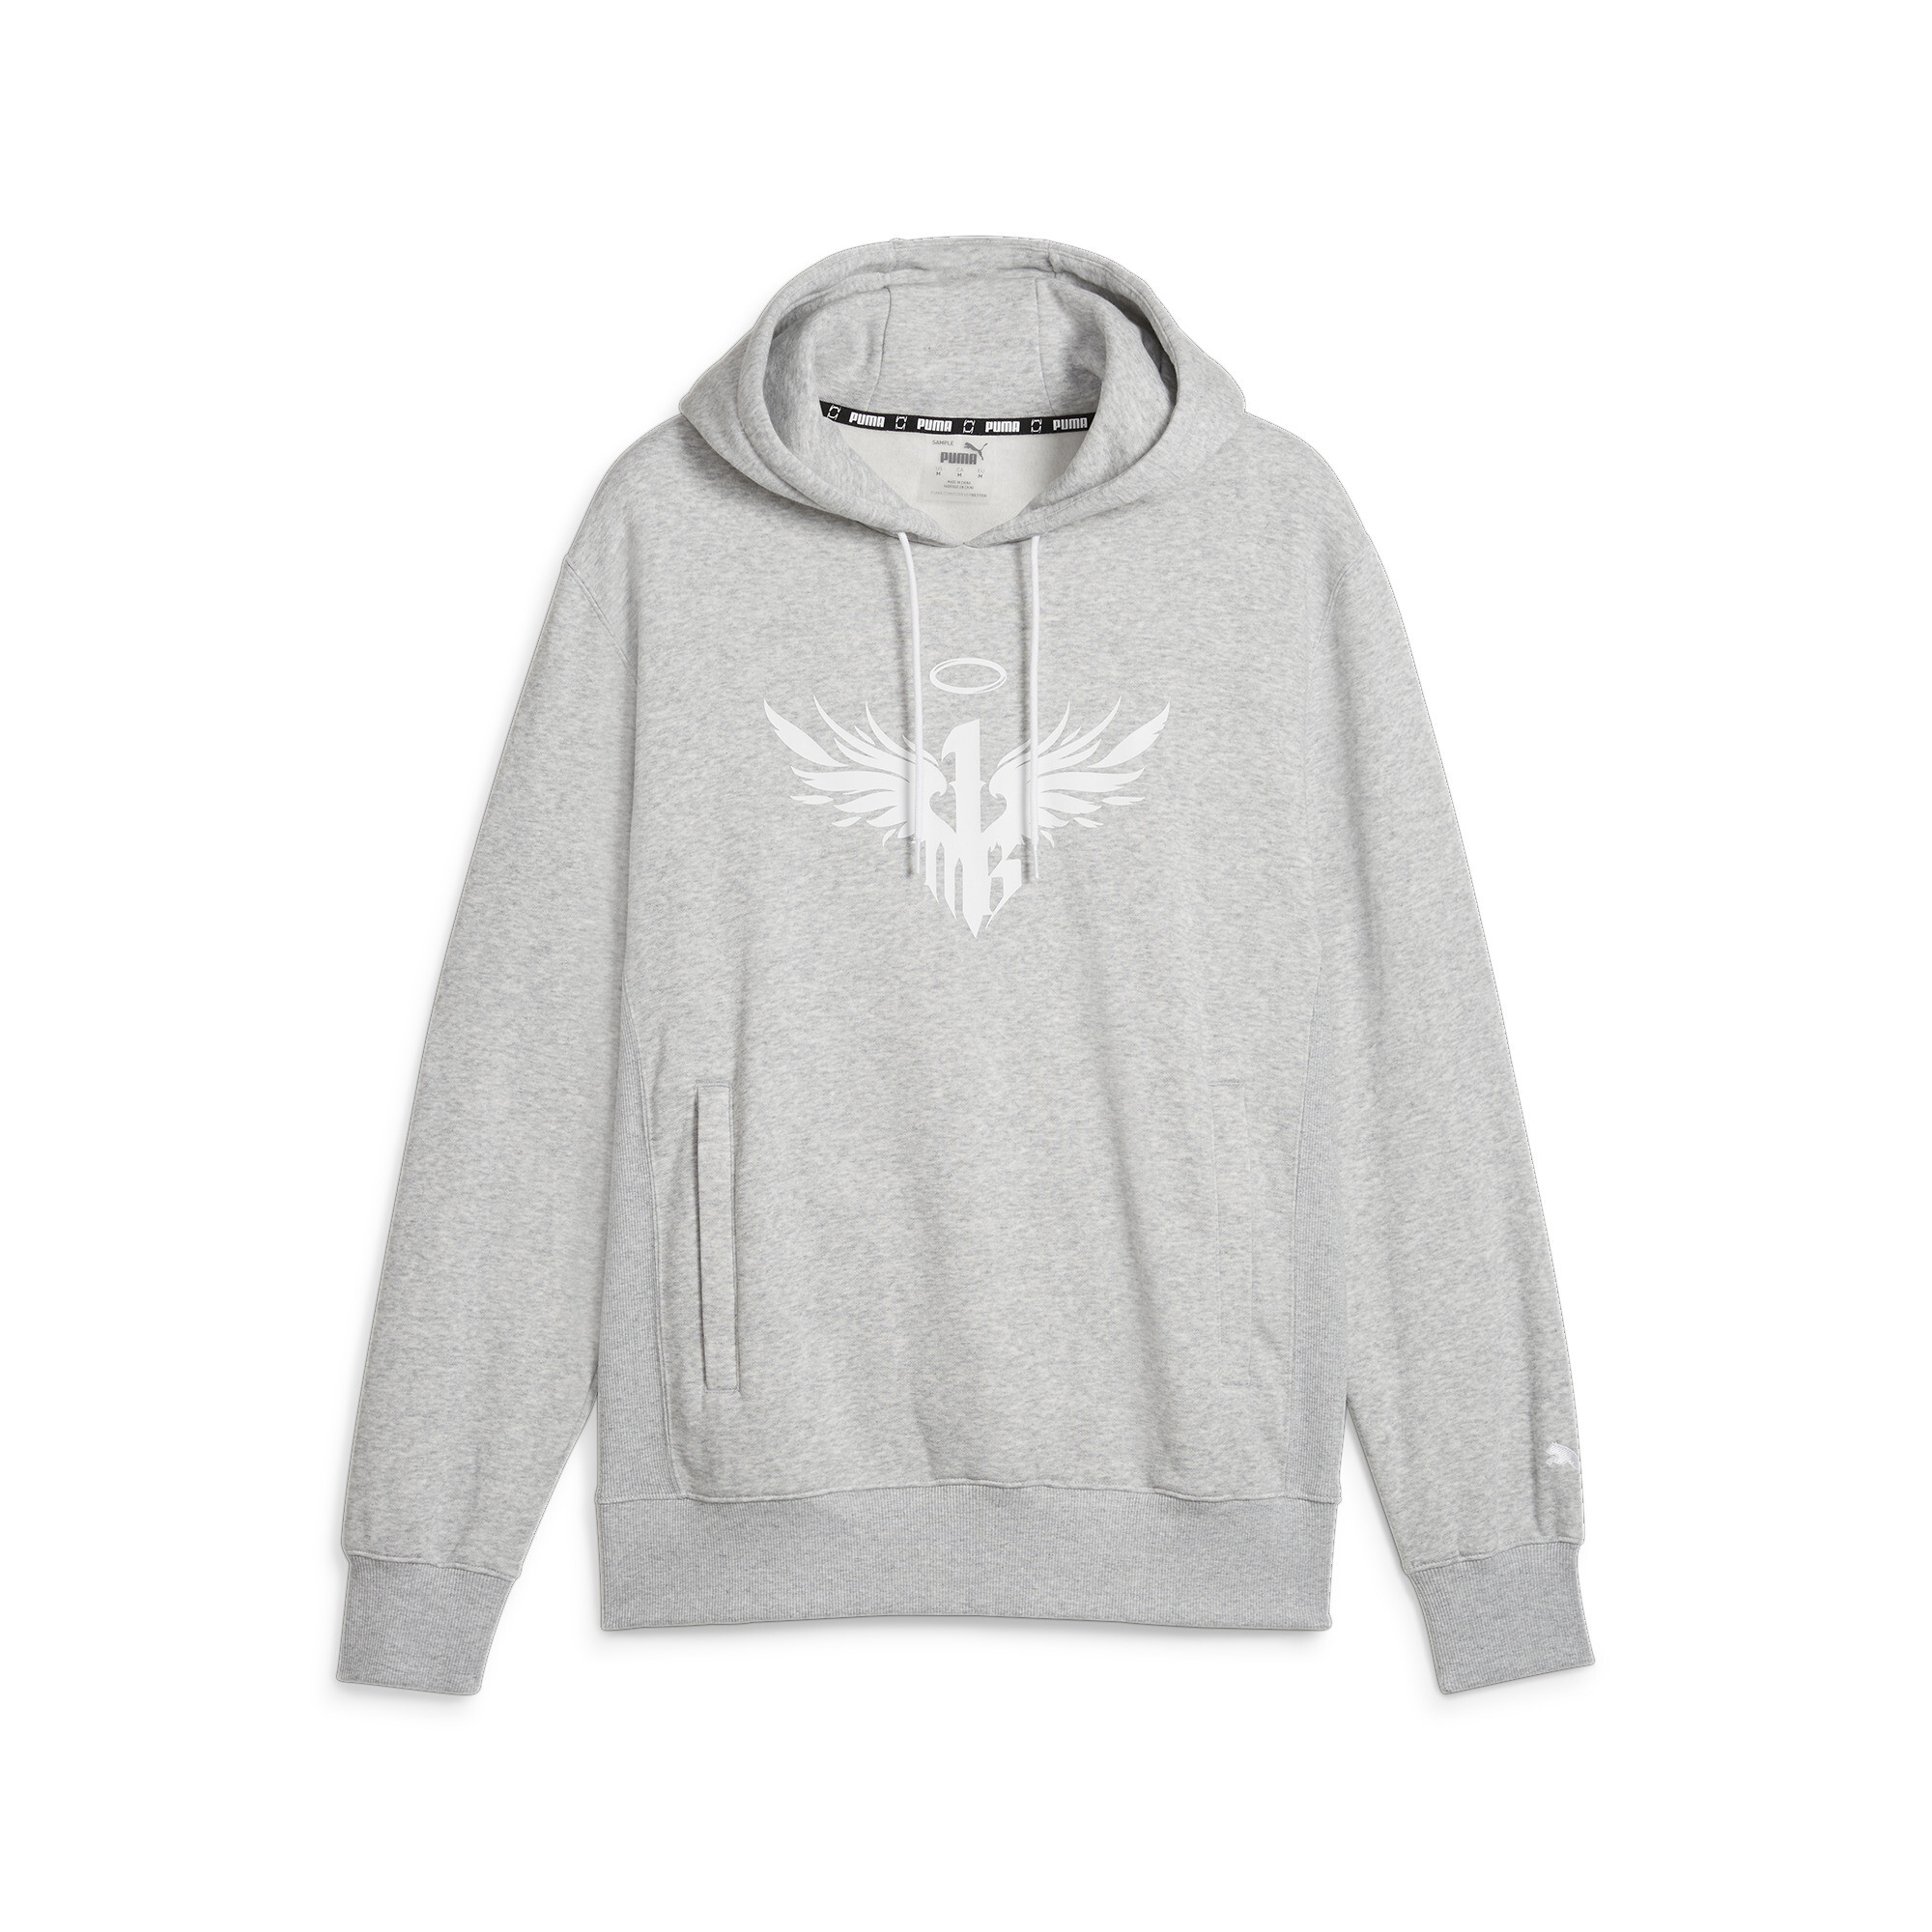 Men's PUMA X MELO Hoodie In Heather, Size Large